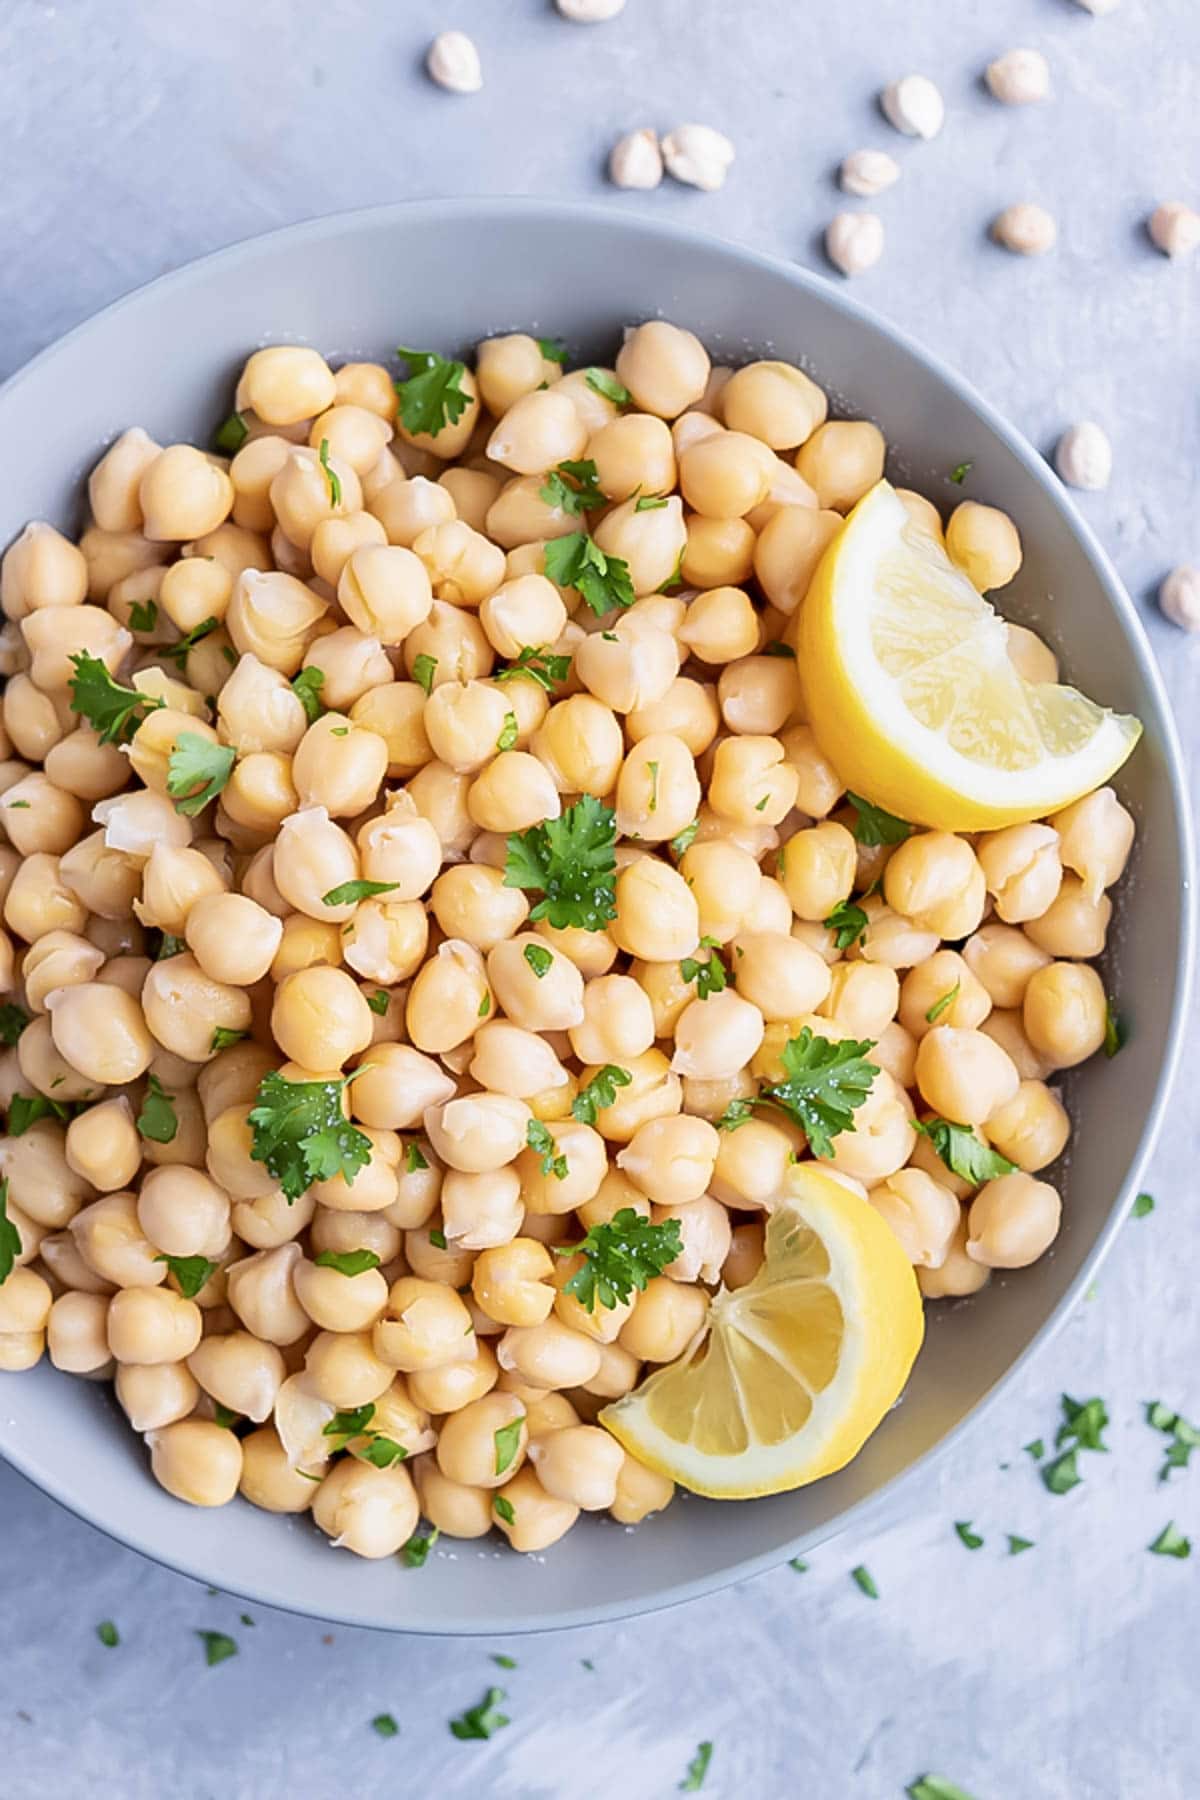 A bowl full of cooked garbanzo beans that are full of fiber, protein, and calories.